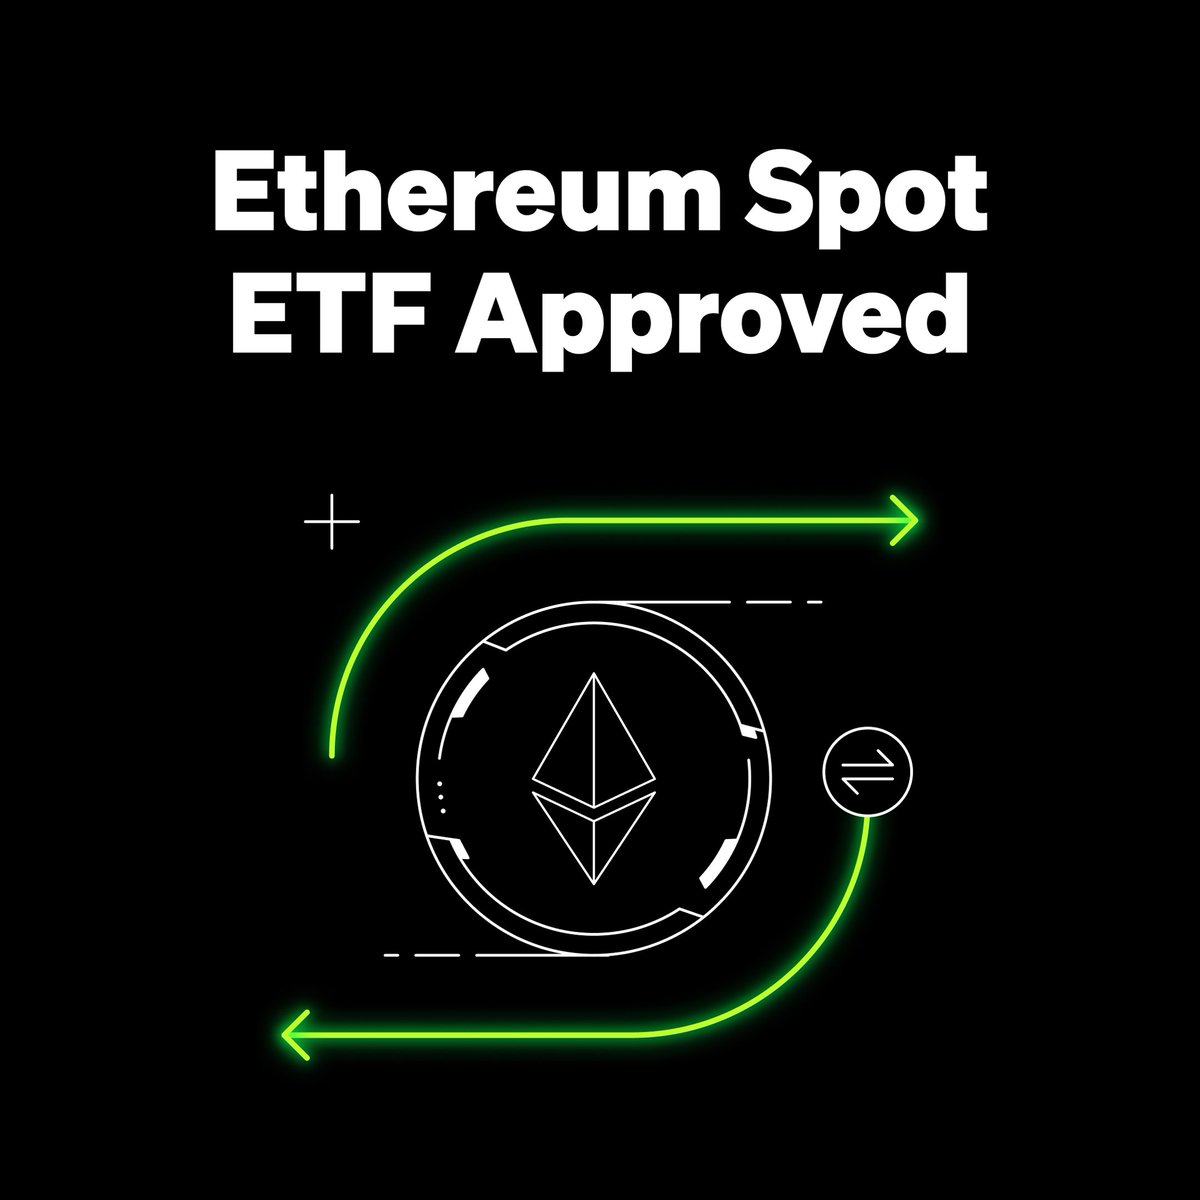 🚨Breaking: spot Ethereum ETF has been approved by the U.S. Securities and Exchange Commission 🚨 Another major milestone in driving mainstream crypto adoption 🙌